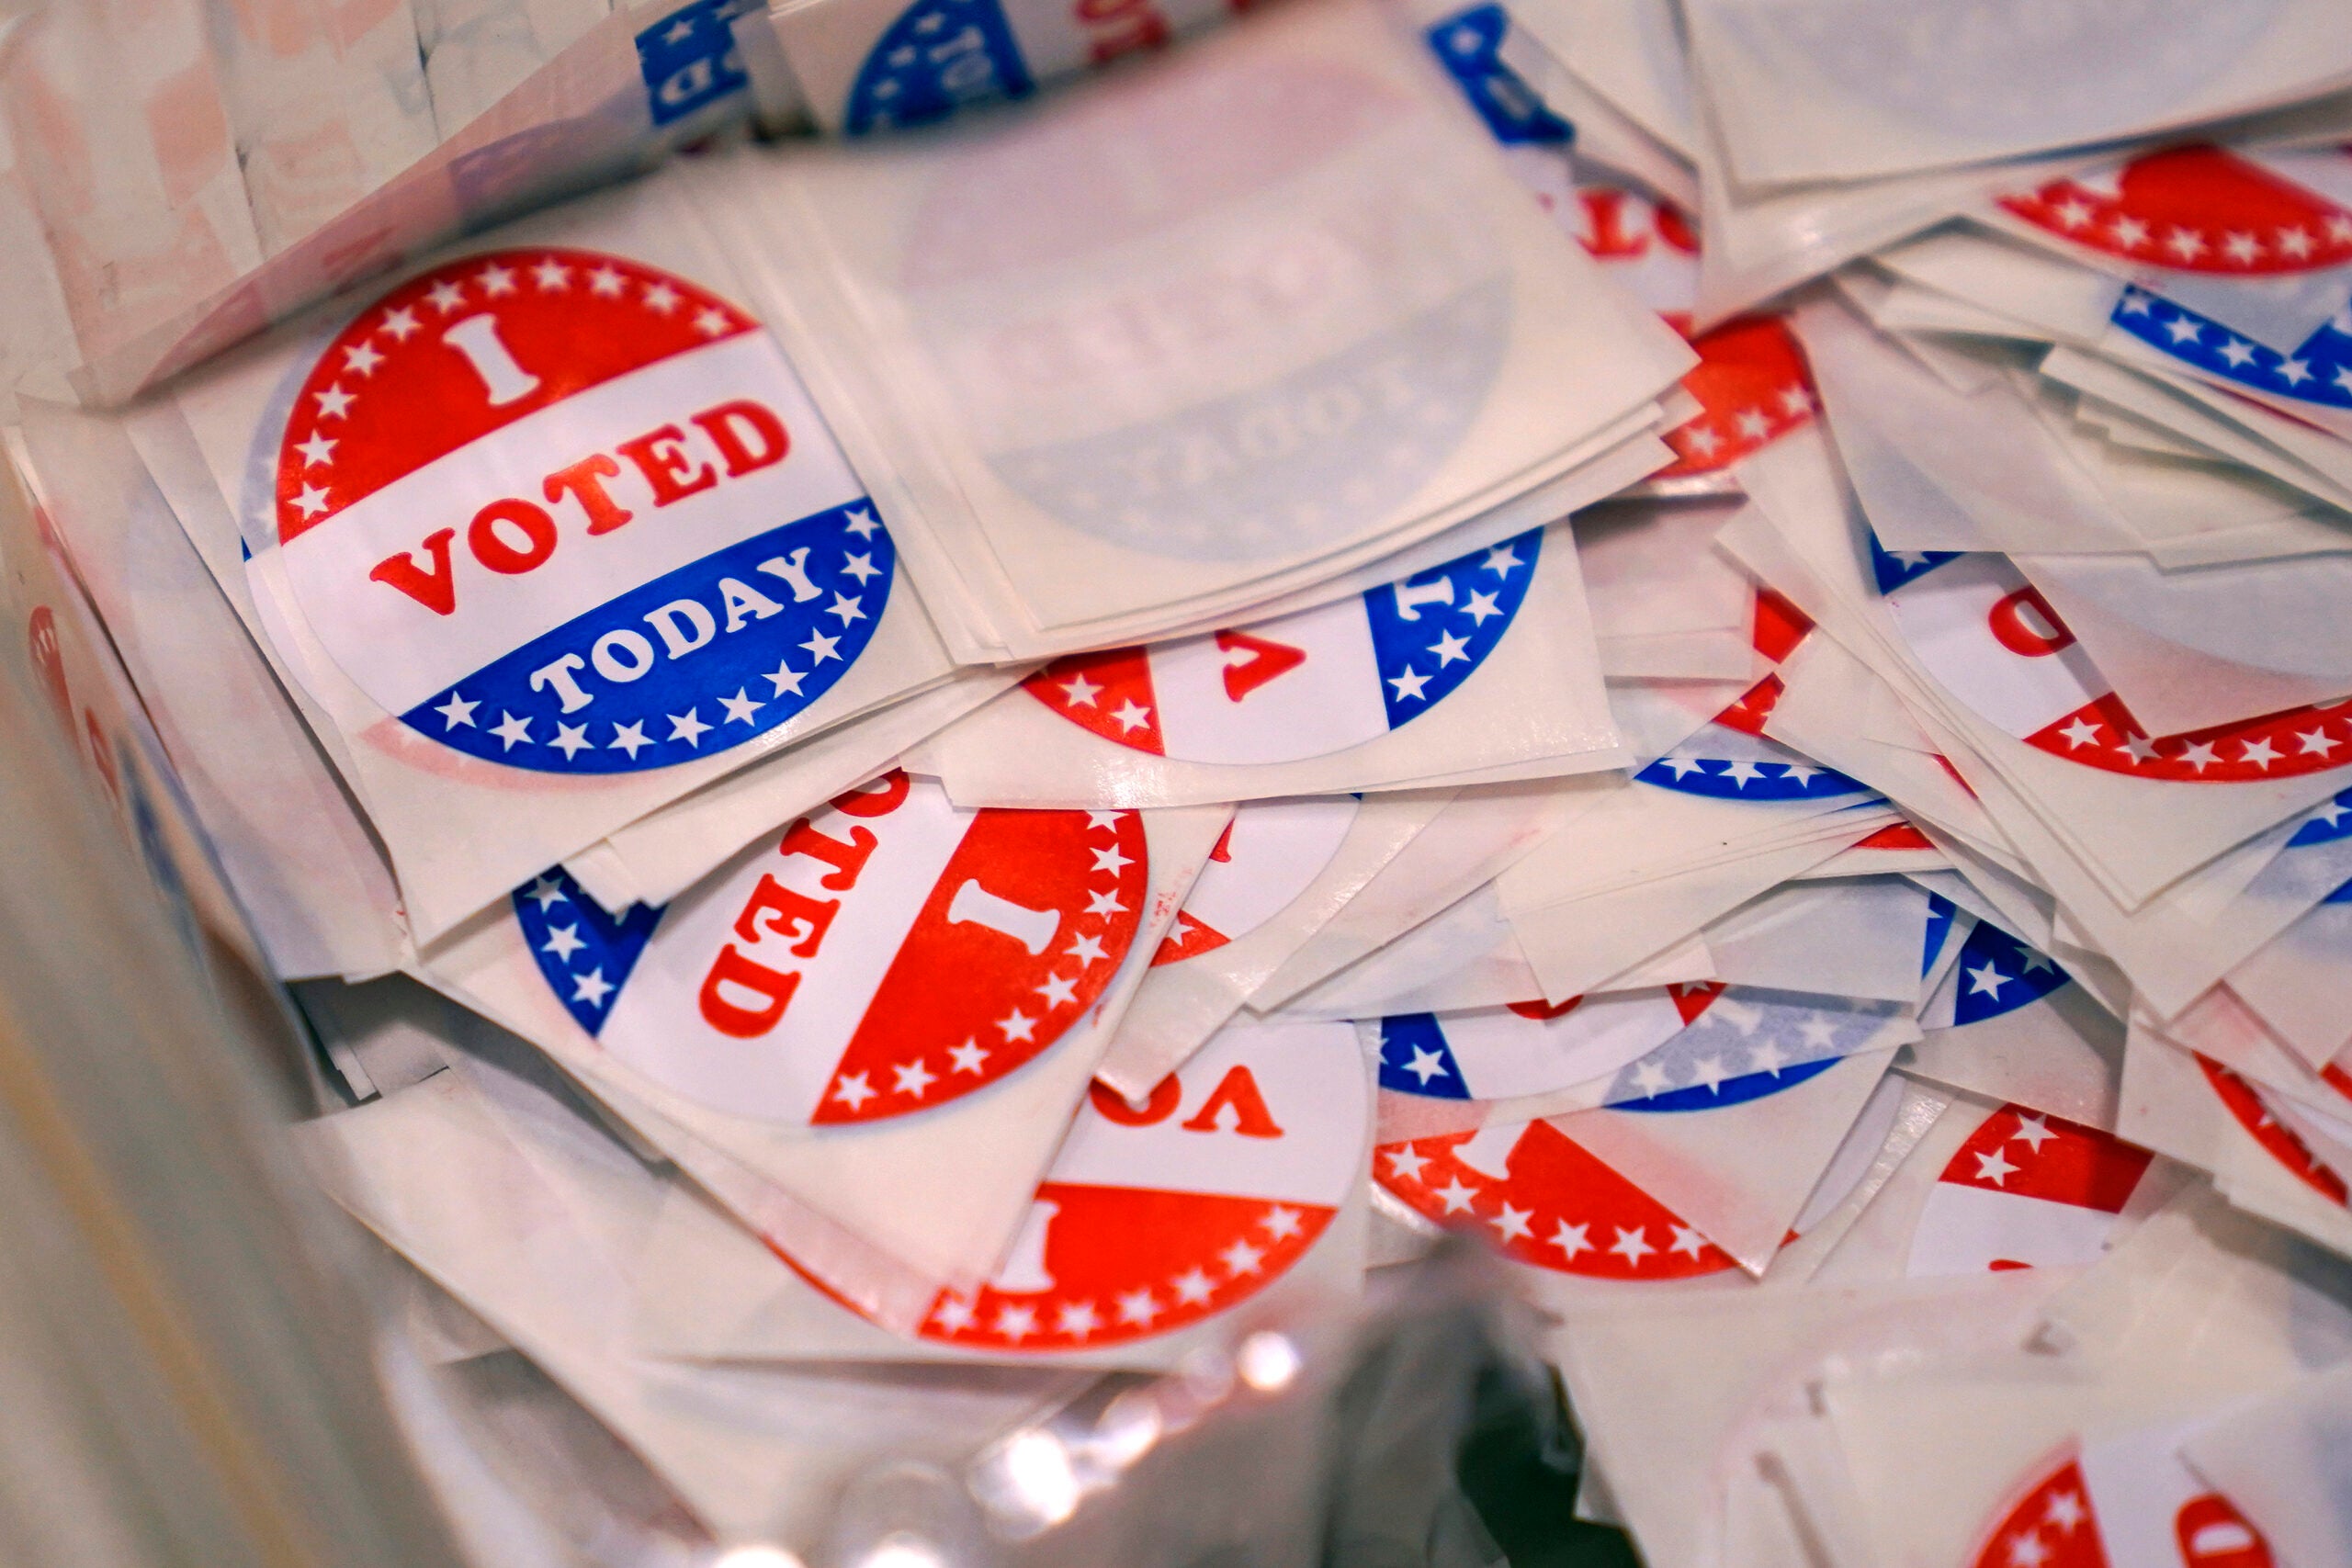 A bin of "I Voted Today" stickers rests on a table at a polling place in Stratham, N.H.